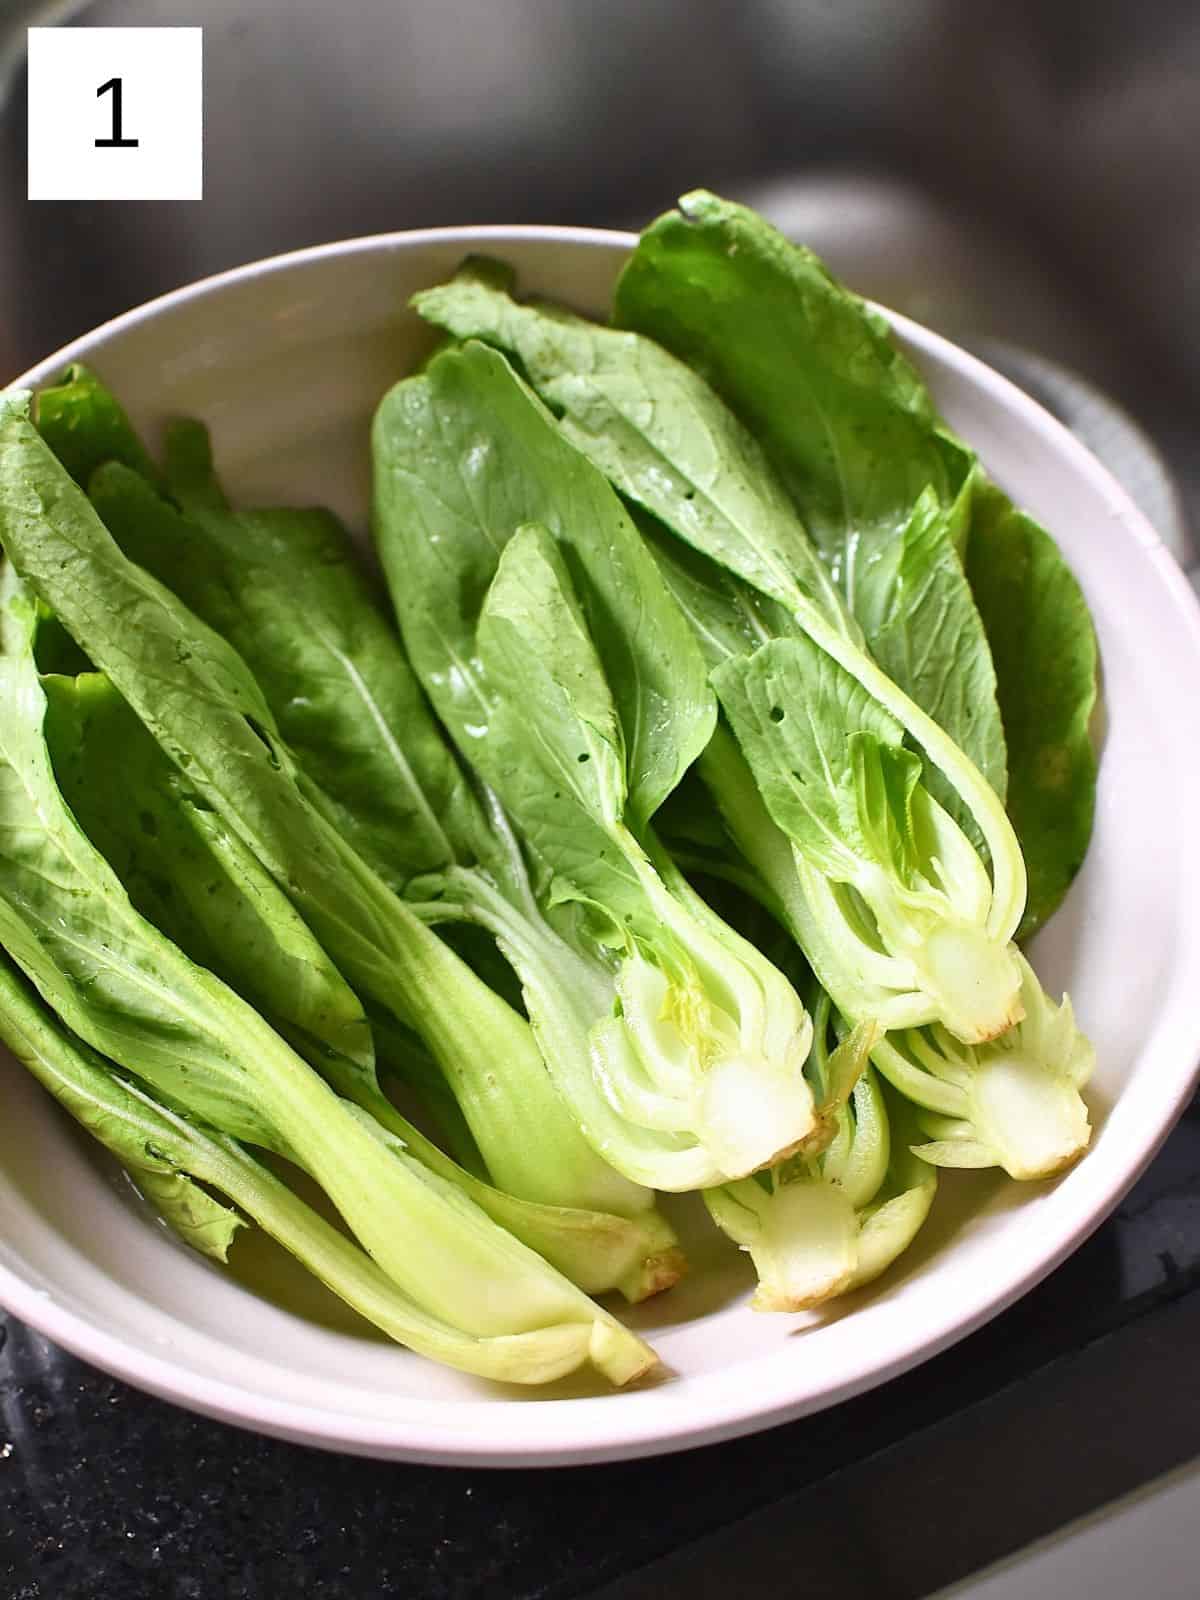 washed bok choy in a bowl.